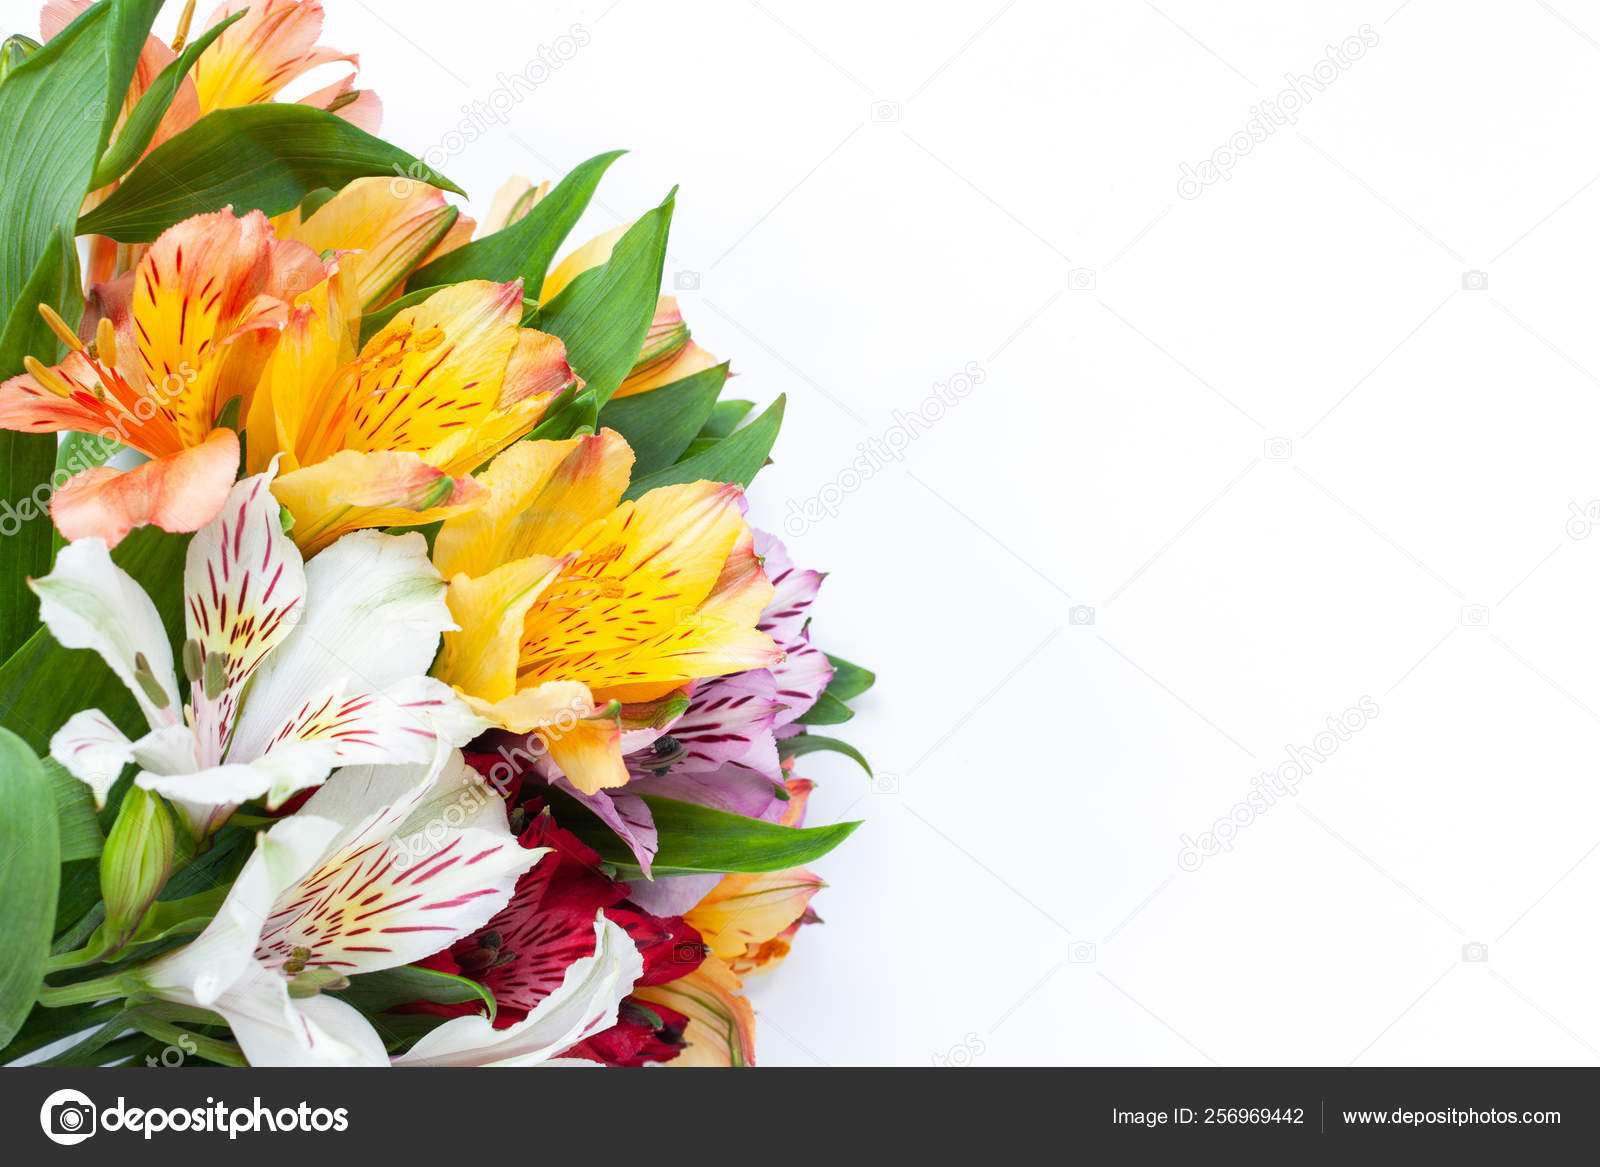 Bouquet of colorful flowers alstroemeria on white background. Flat lay.  Horizontal. Mockup with copy space for greeting card, social media, flower